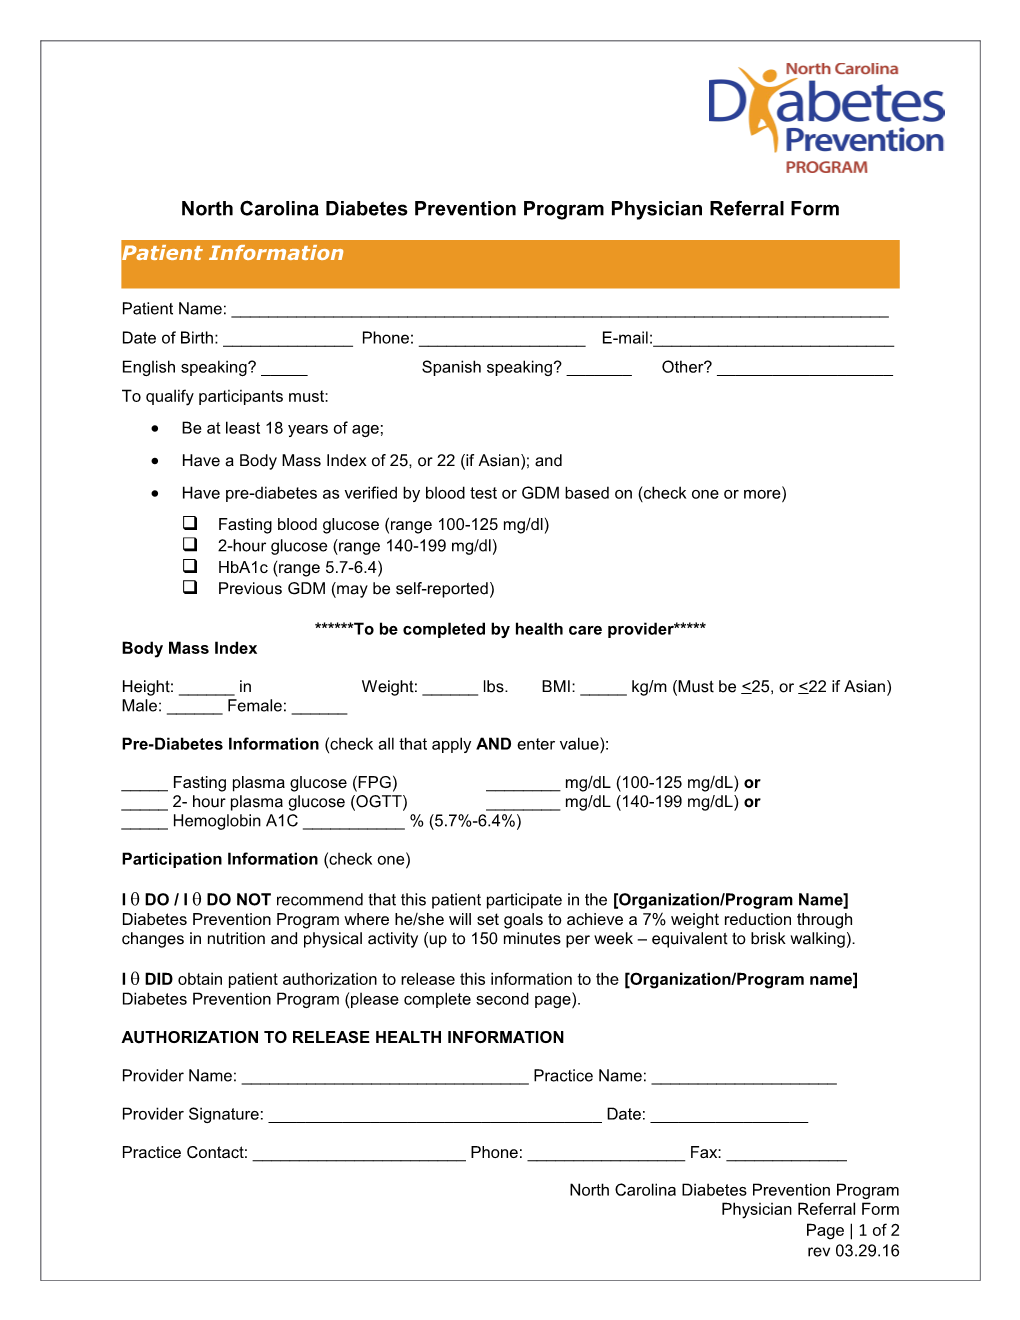 NCDPP Physician Referral Form